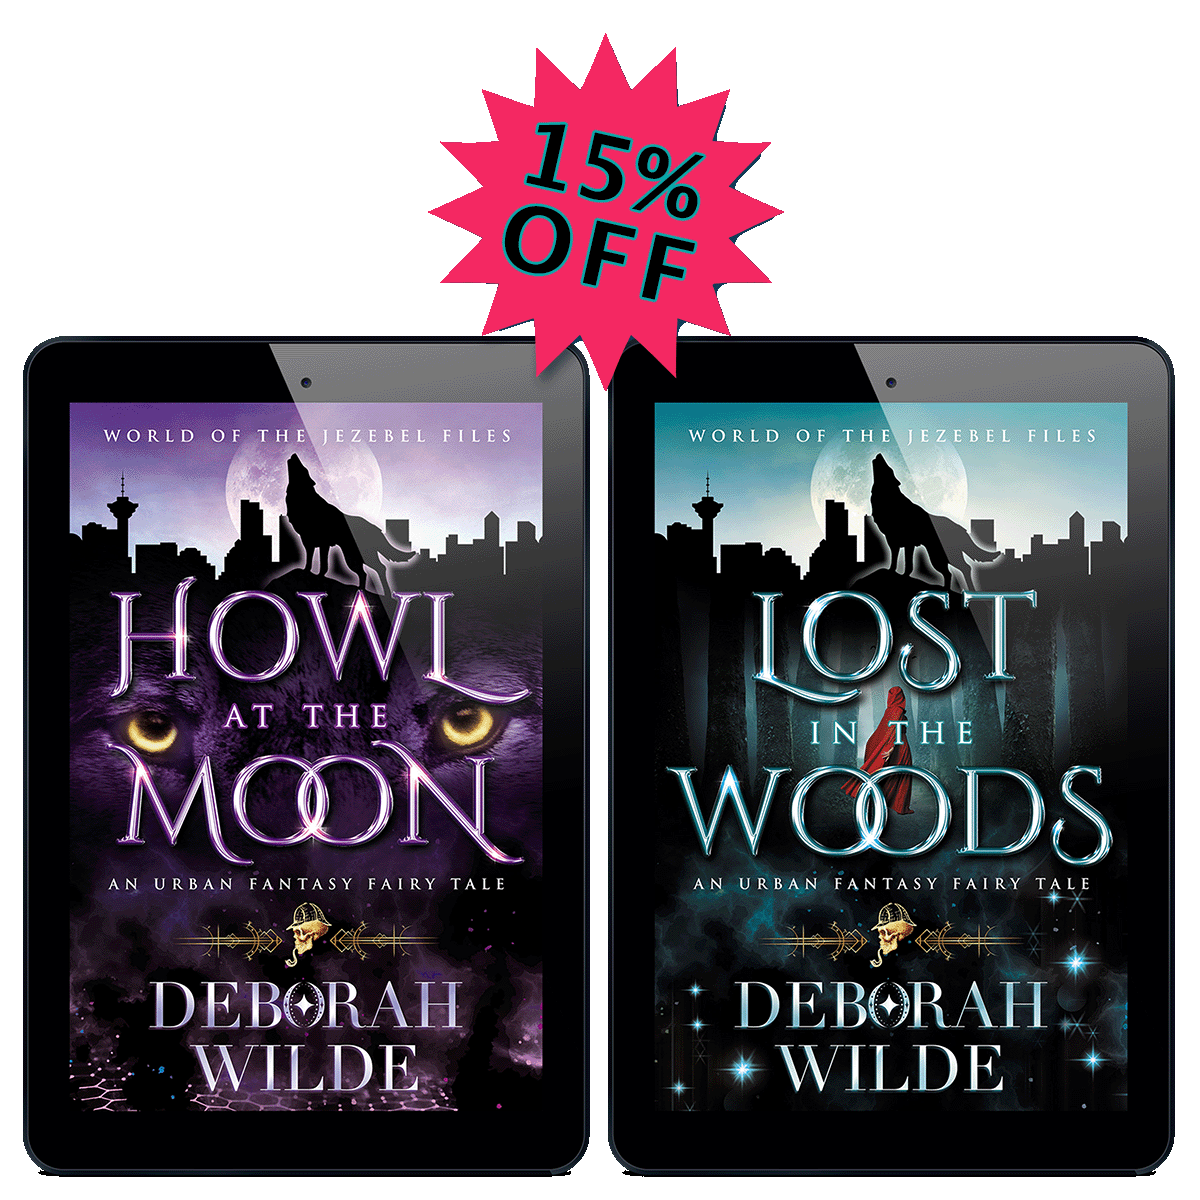 World of the Jezebel Files Duology at 15% off. An urban fantasy fairy tale by Deborah Wilde.